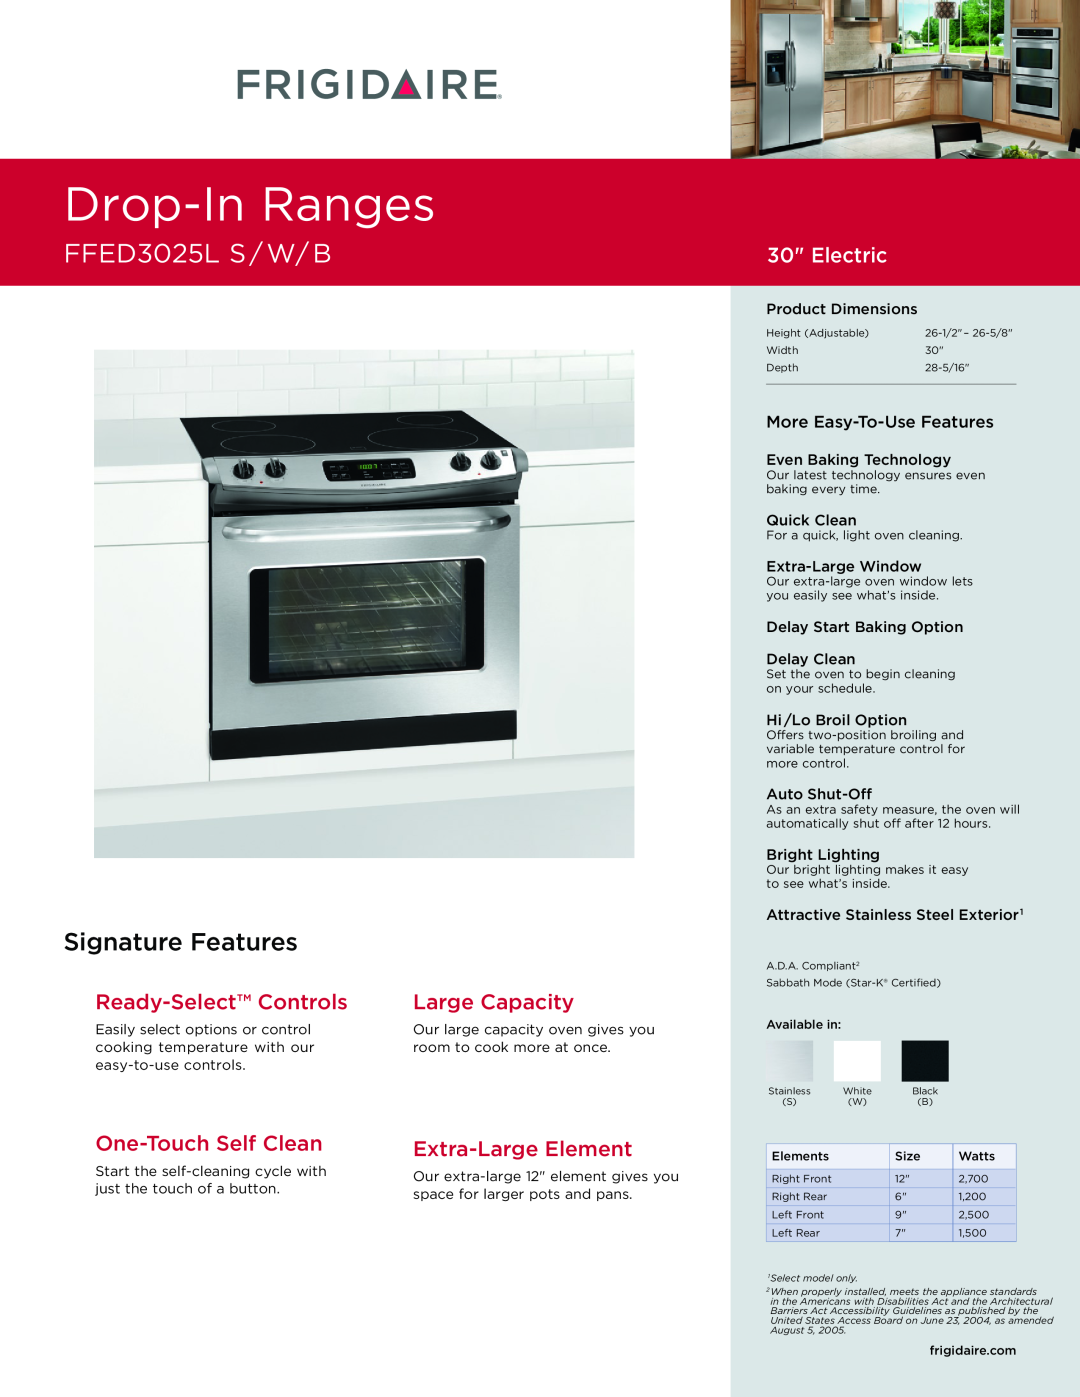 Frigidaire FPEC3085KS dimensions More Easy-To-UseFeatures, Overall Exterior Dimensions, Available in, PowerPlus Boil 